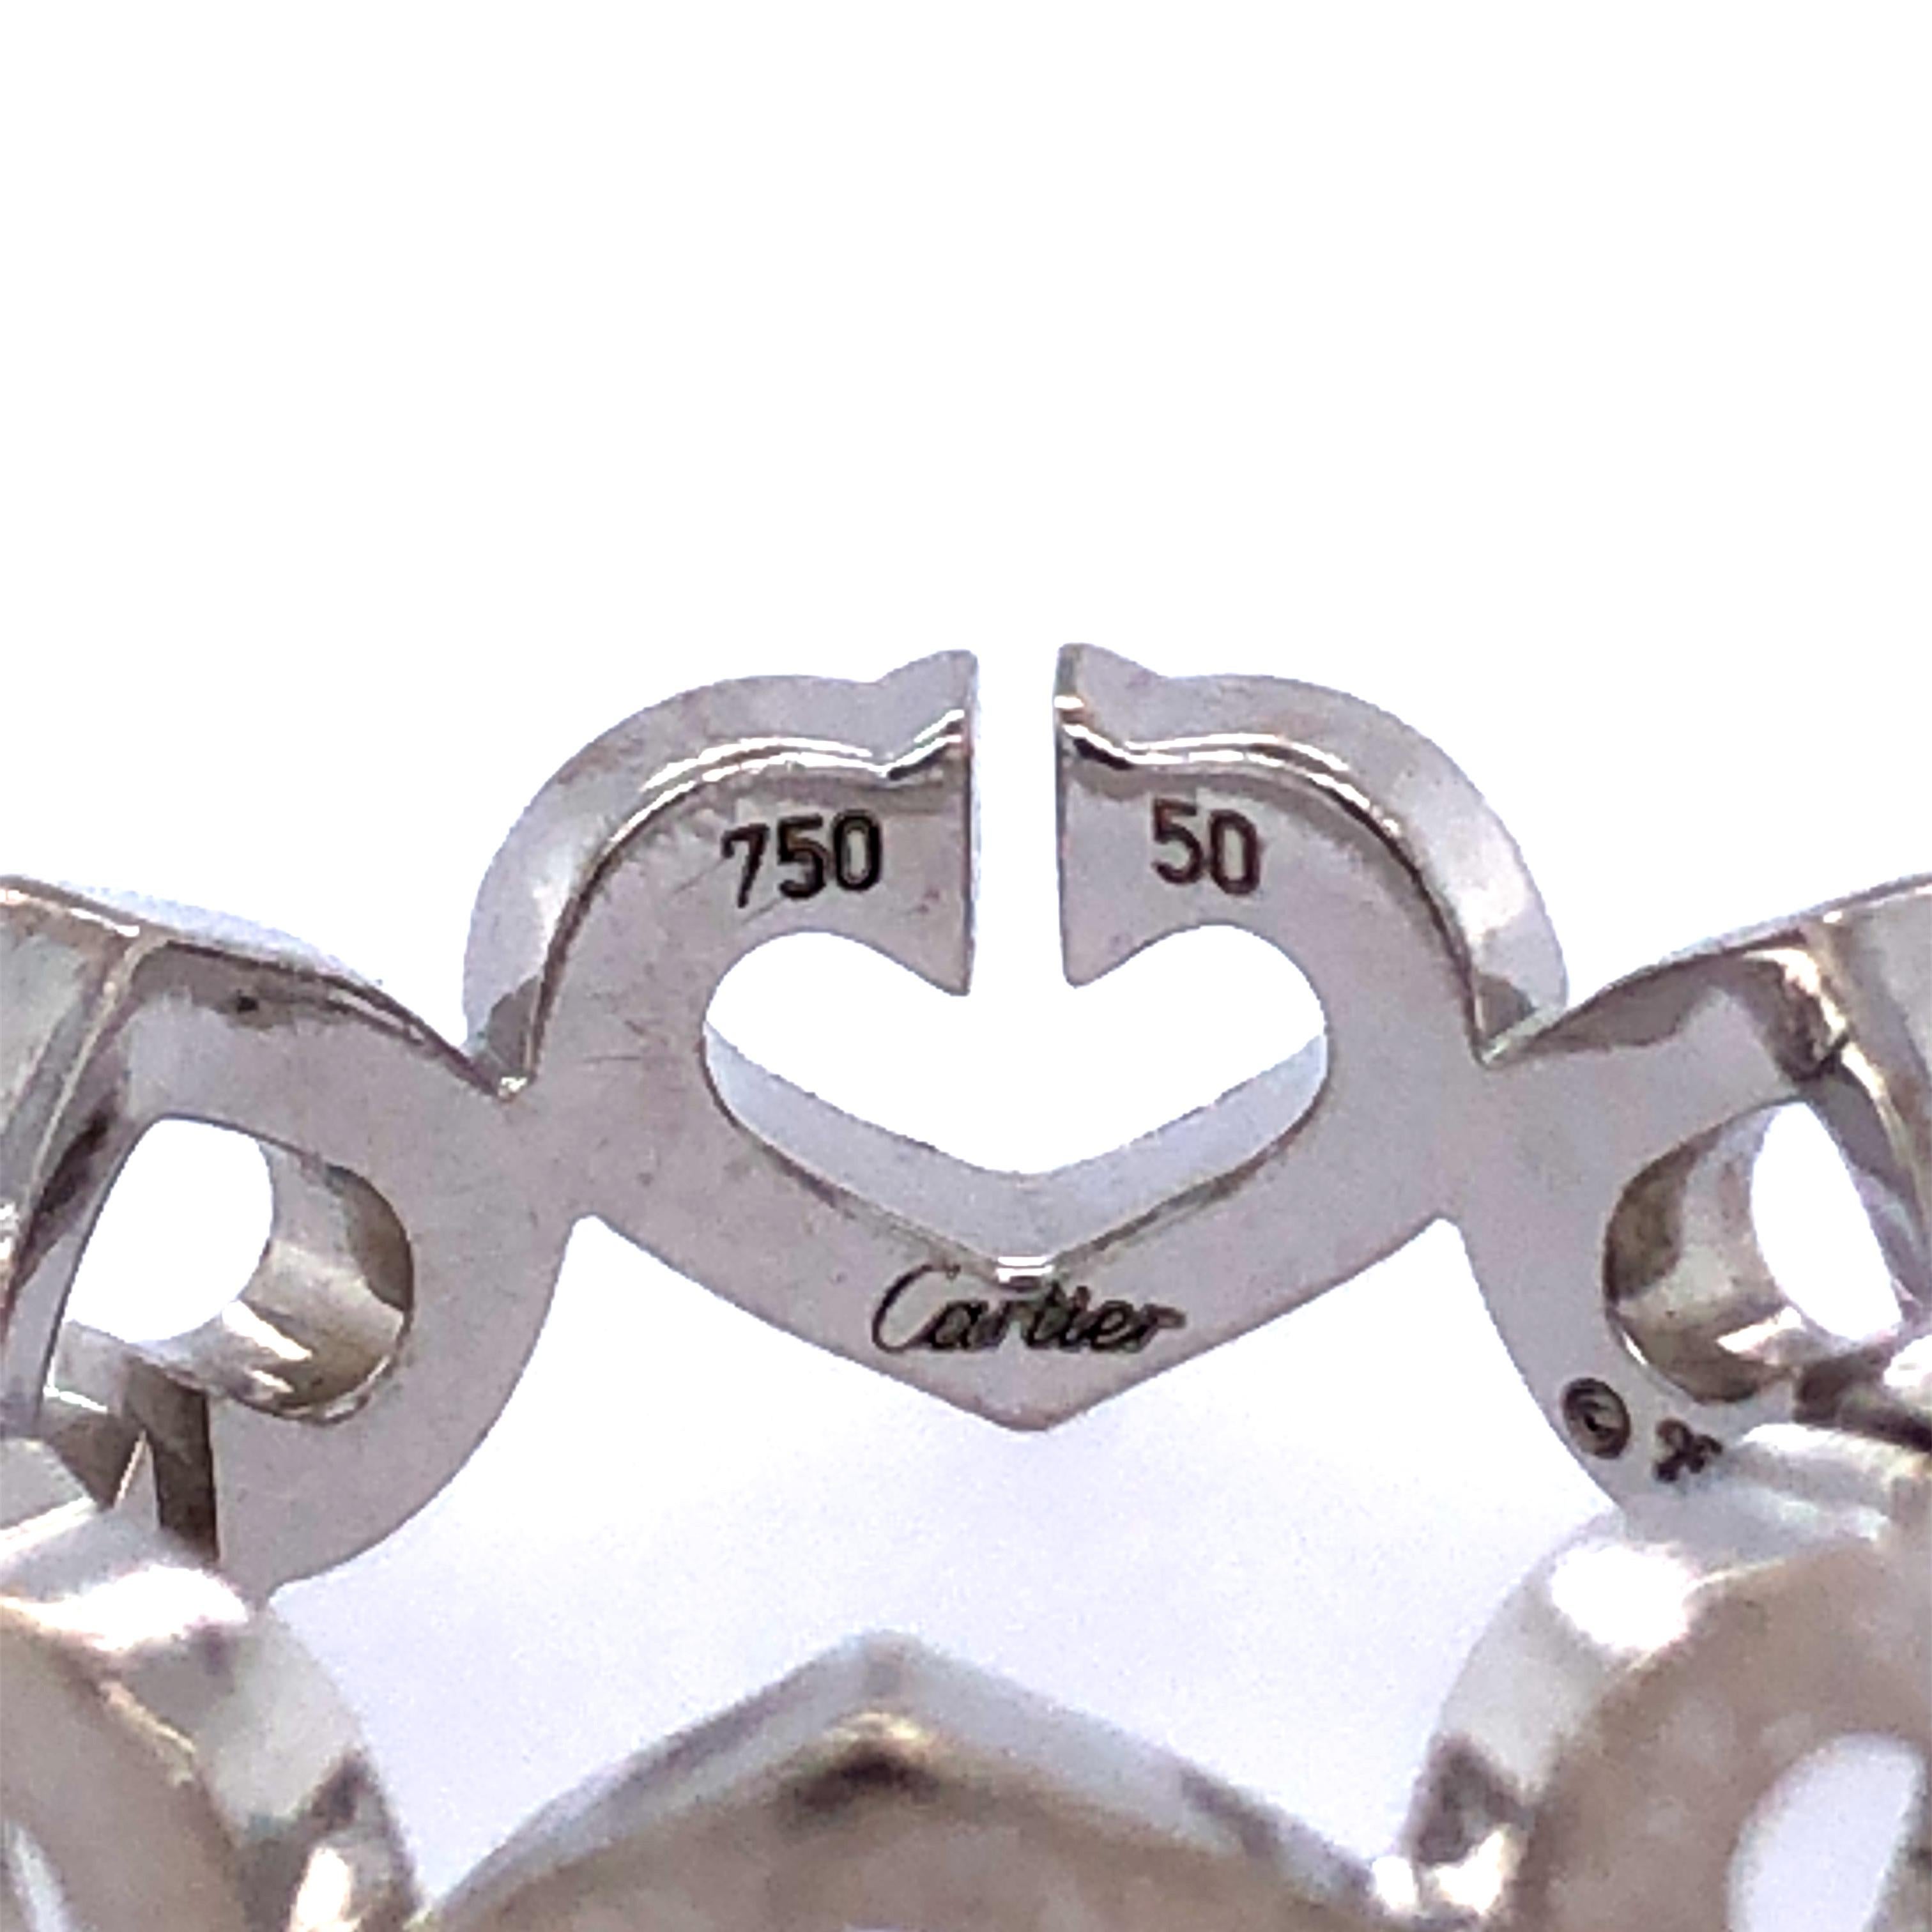 An iconic 18k white gold Cartier ring from the Hearts and Symbols collection. The 6 signature 'double C's' are joined to form small open work heart motifs, set to the centre with a single pave set heart motif. The ring is a US size 5.2 I and has a